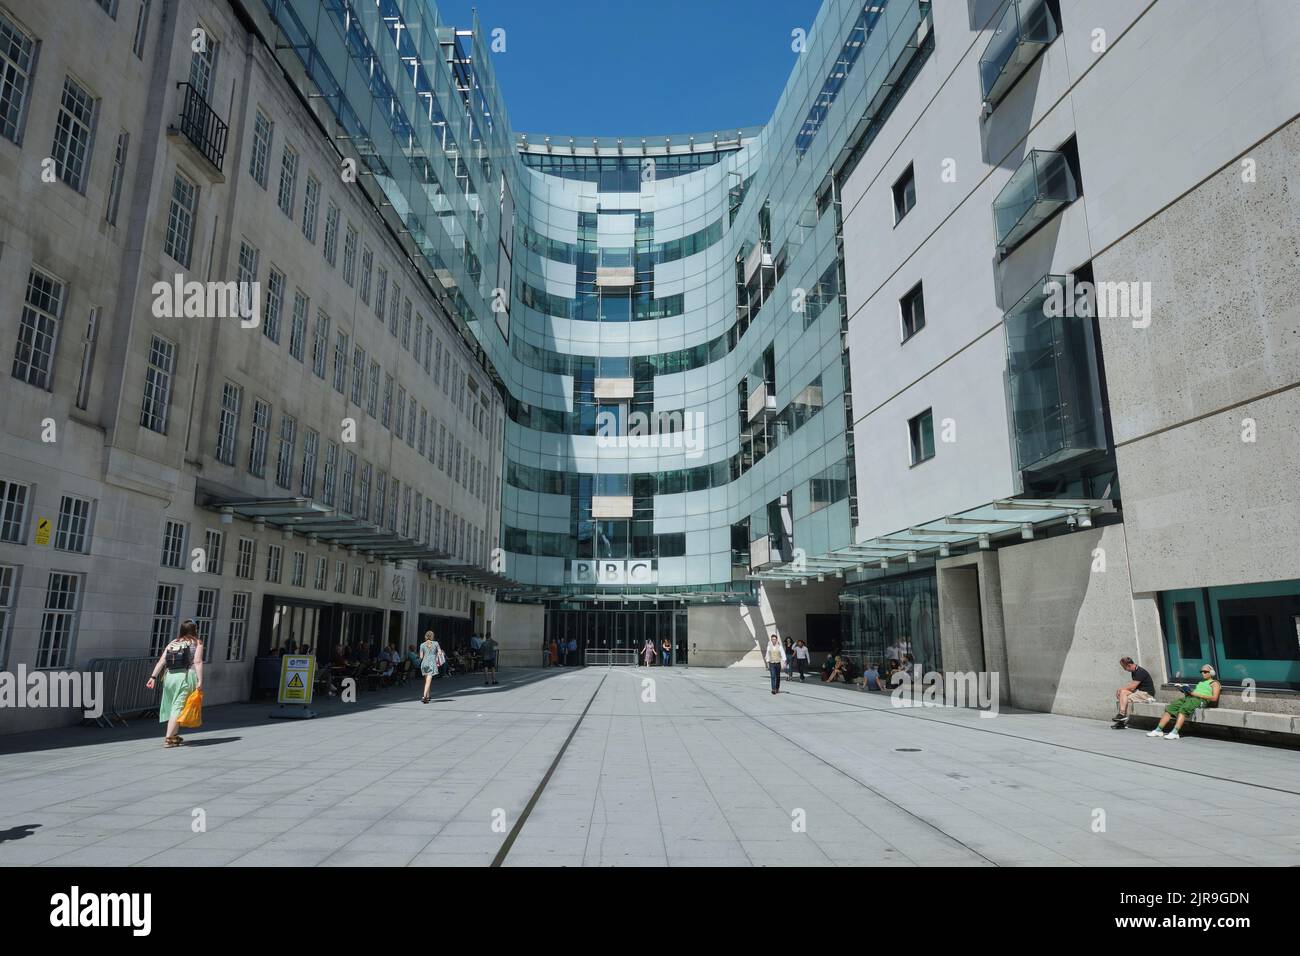 Exterior view of the main entrance to the BBC in London Stock Photo